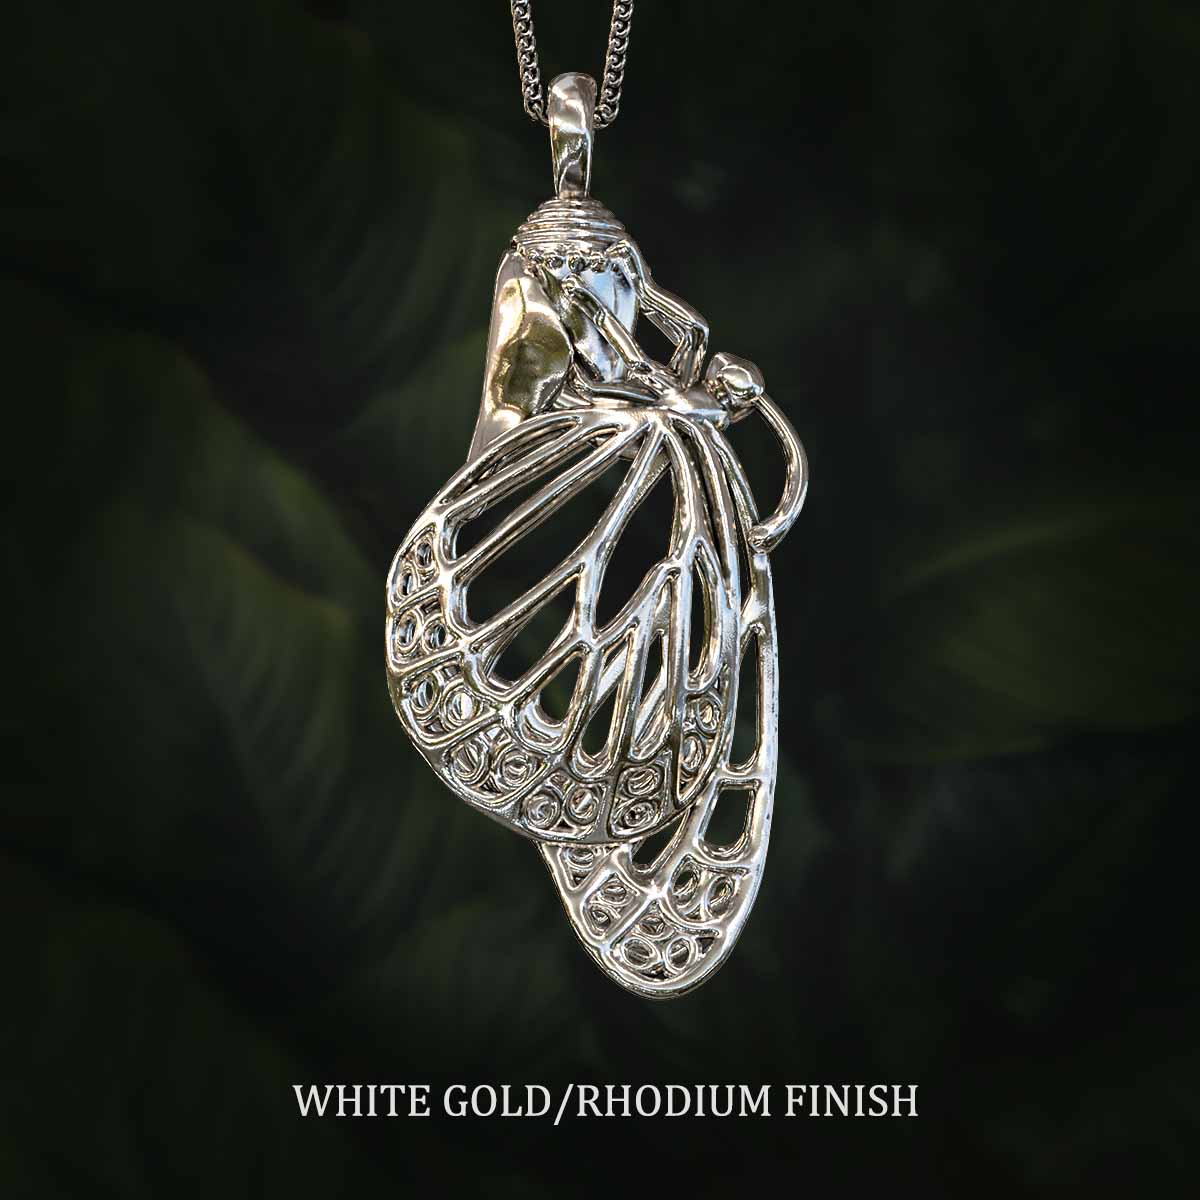 White-Gold-Rhodium-Finish-Monarch-Chrysalis-Pendant-Jewelry-For-Necklace